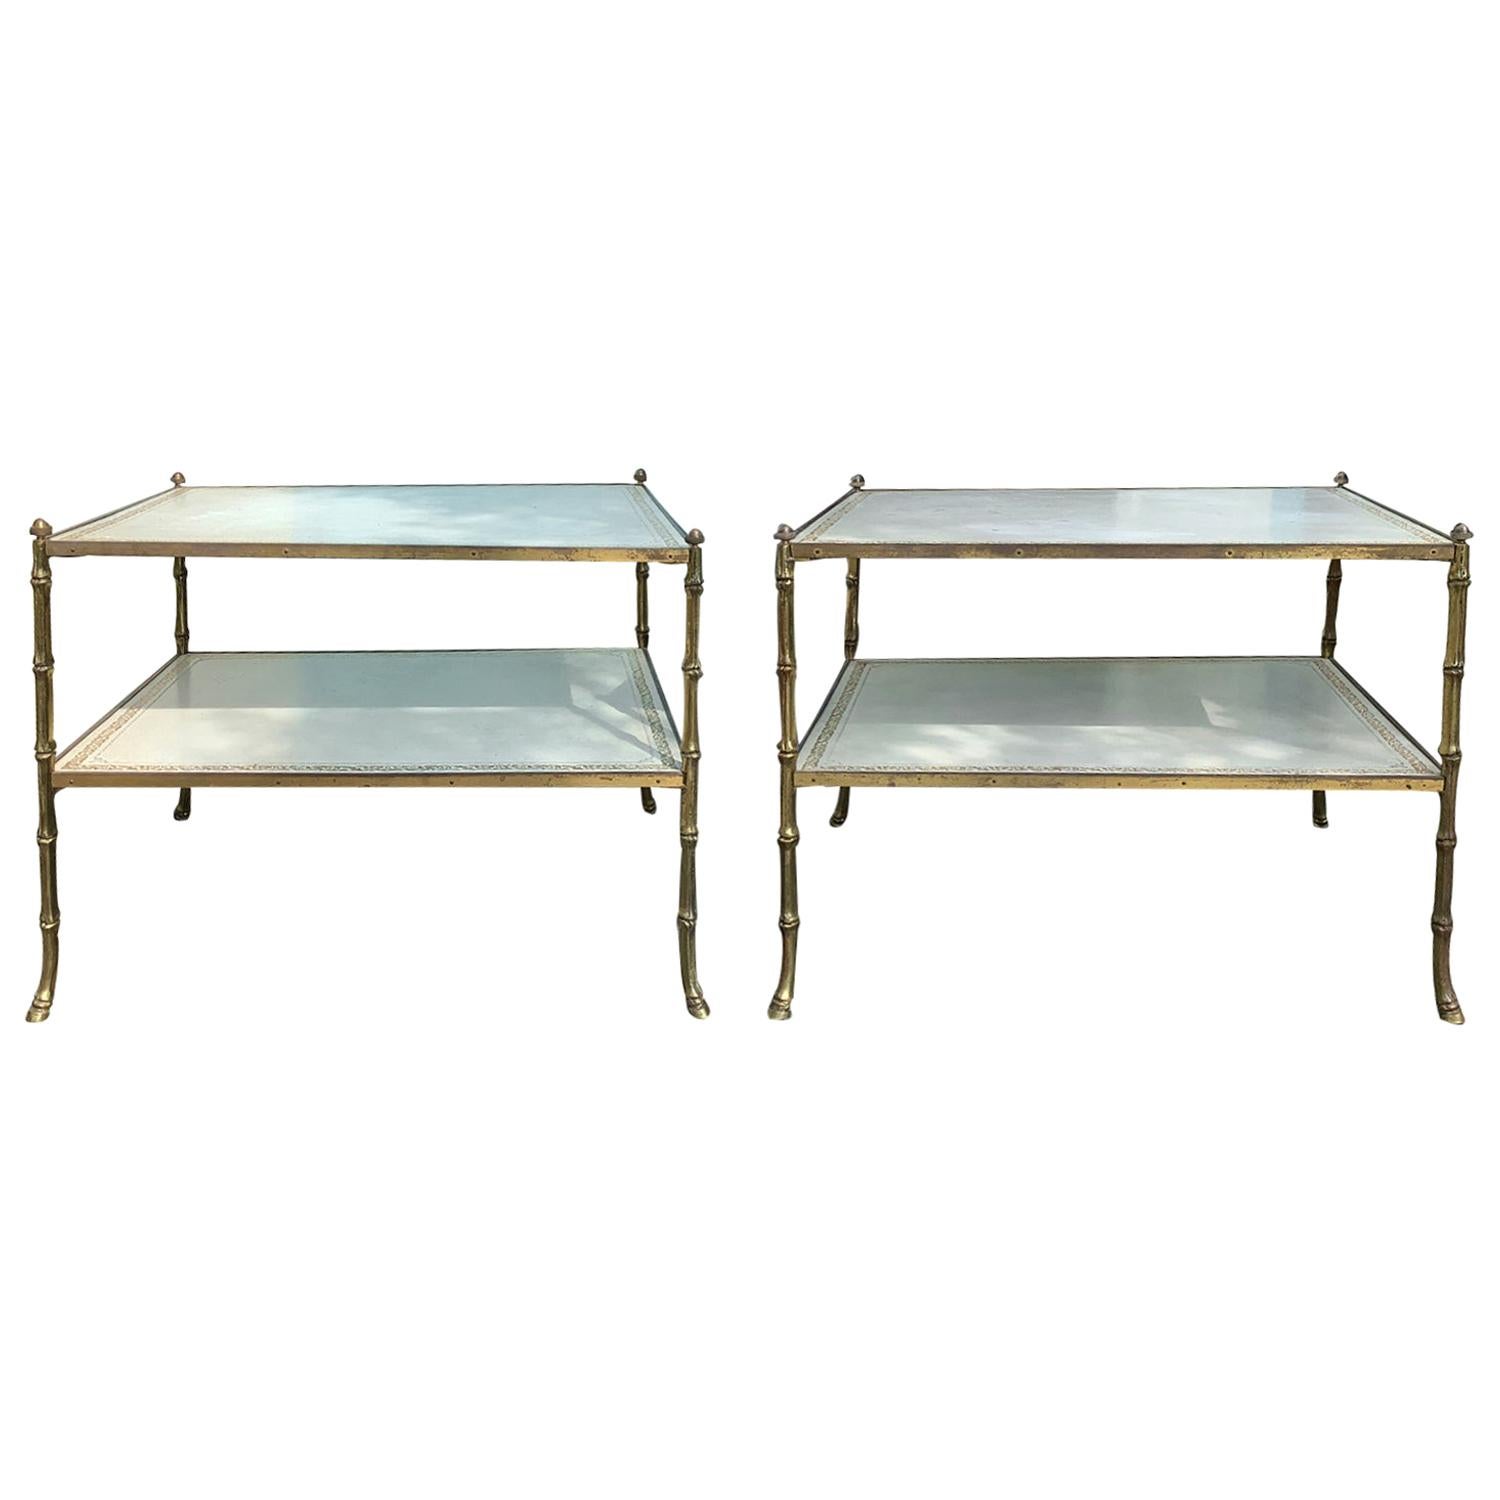 Pair of 20th Century Maison Baguès White Embossed Leather Top Two-Tier Tables